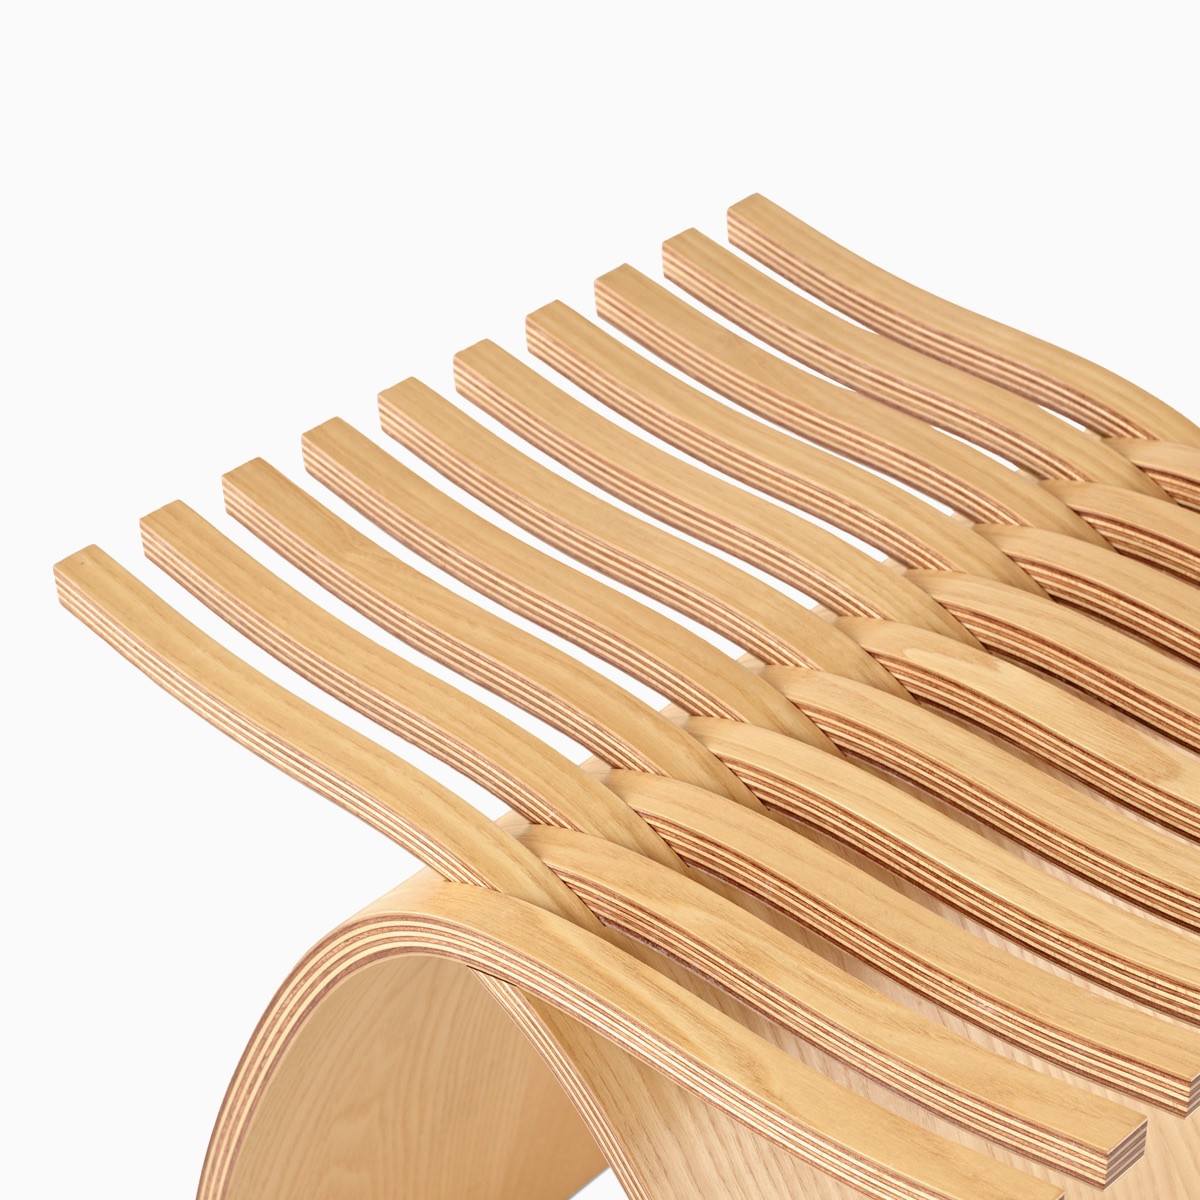 Detailed shot of the Capelli Stool highlighting the interlocking pieces.